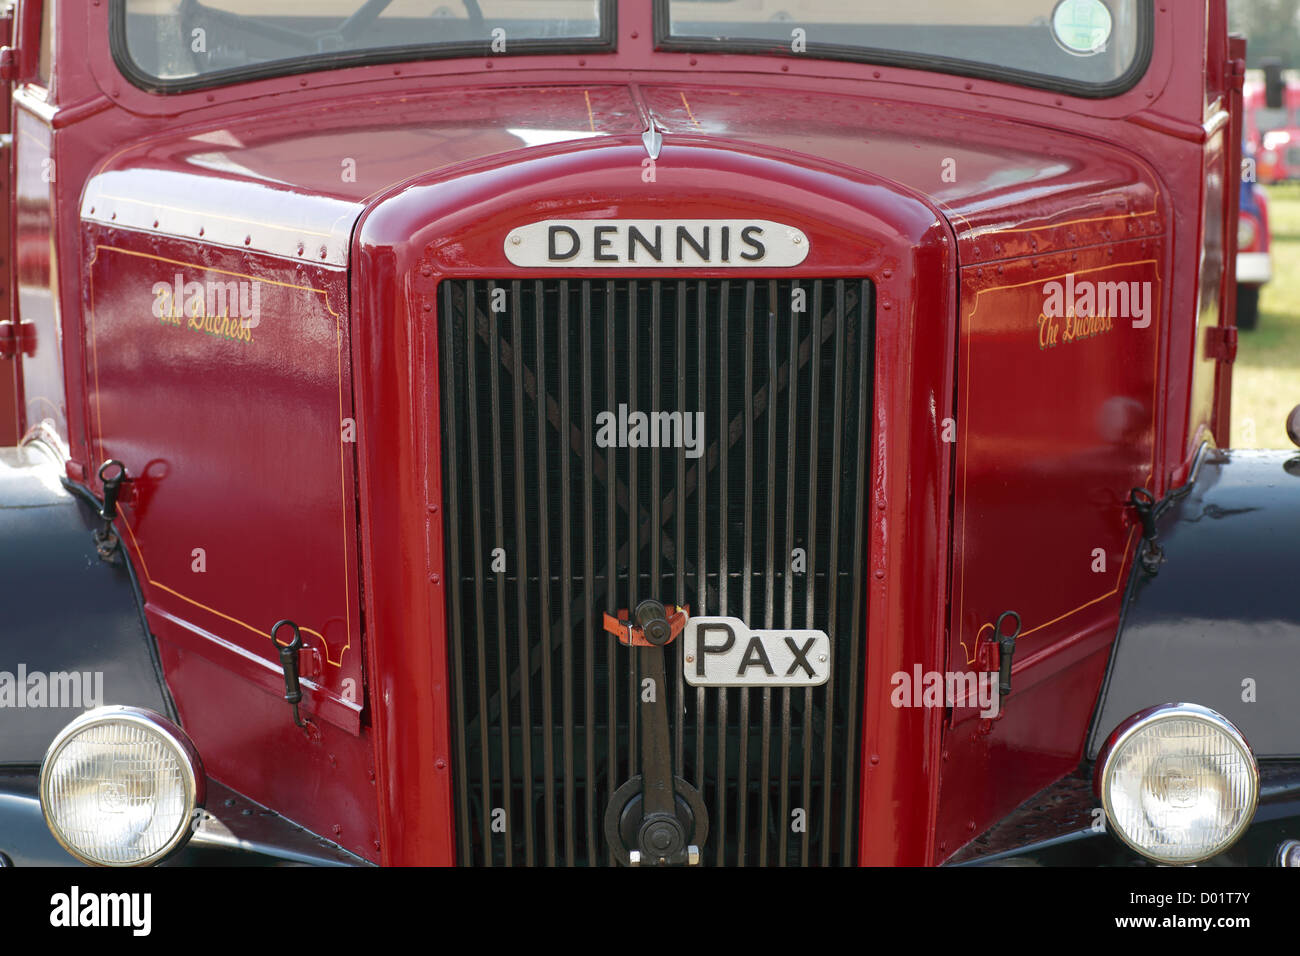 Front Radiator of traditional old Lorry Truck, Dennis Pax Stock Photo